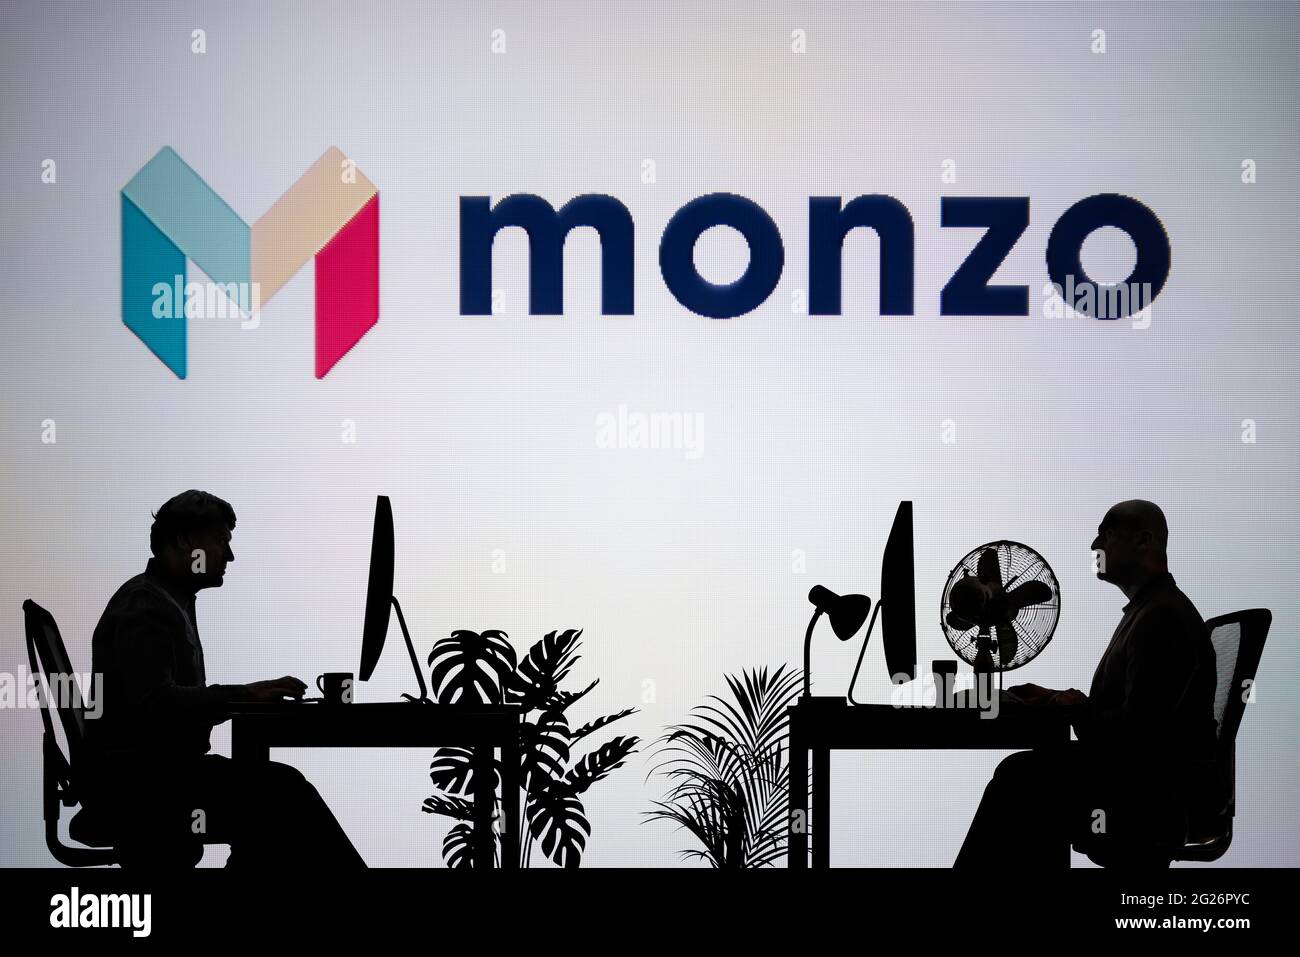 The Monzo bank logo is seen on an LED screen in the background while two silhouetted people work in an office environment (Editorial use only) Stock Photo